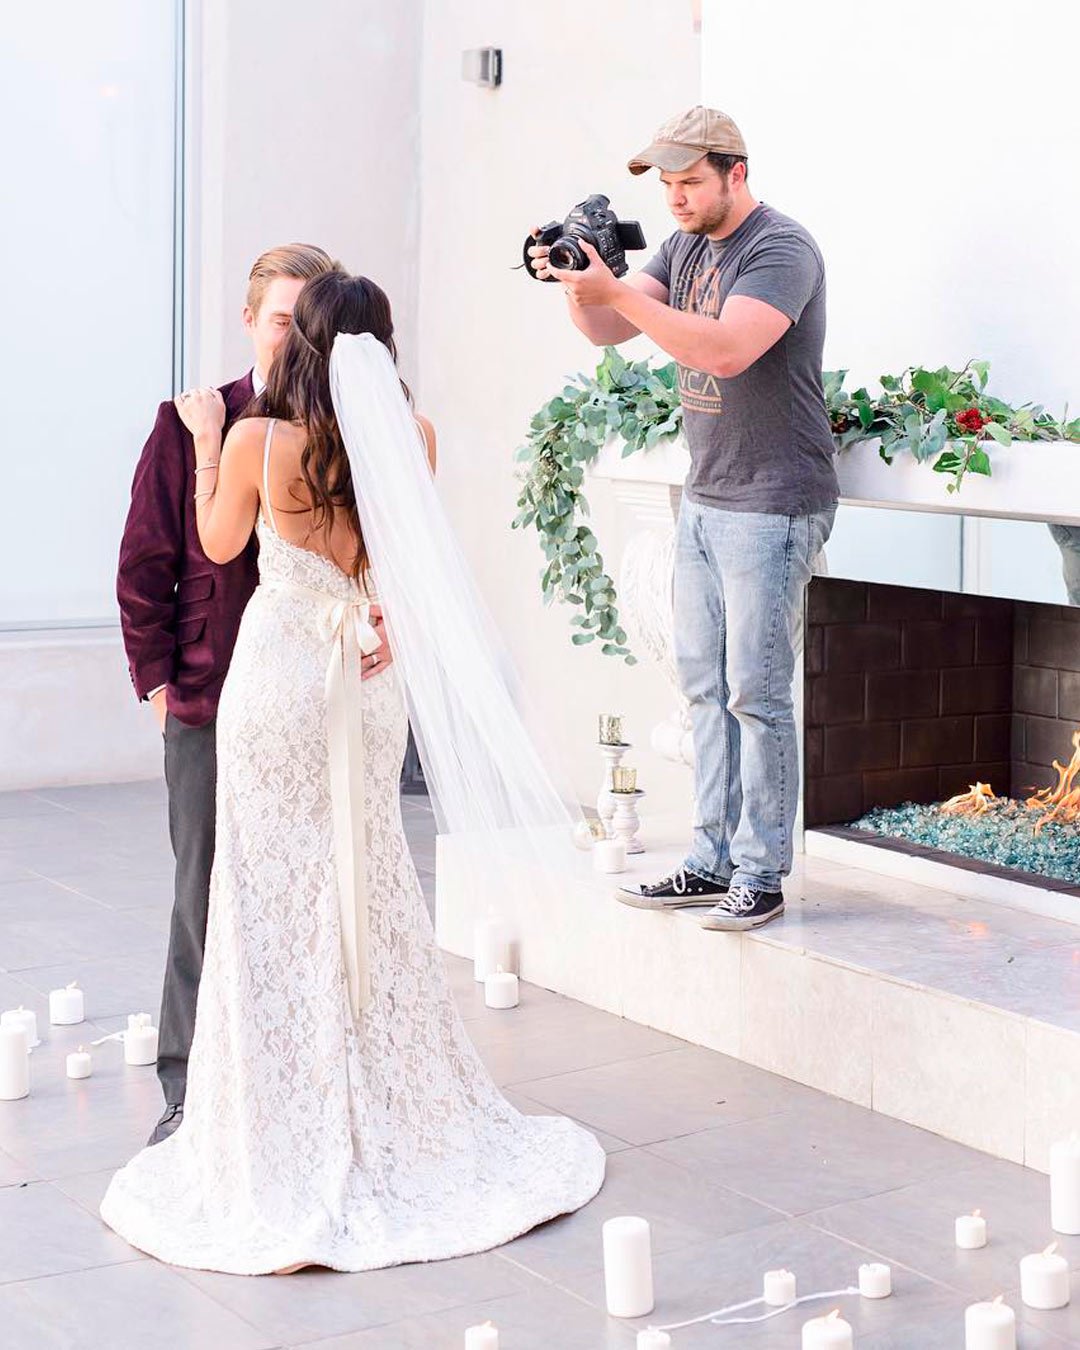 How Much Does A Wedding Photographer Cost: 2022/23 Guide